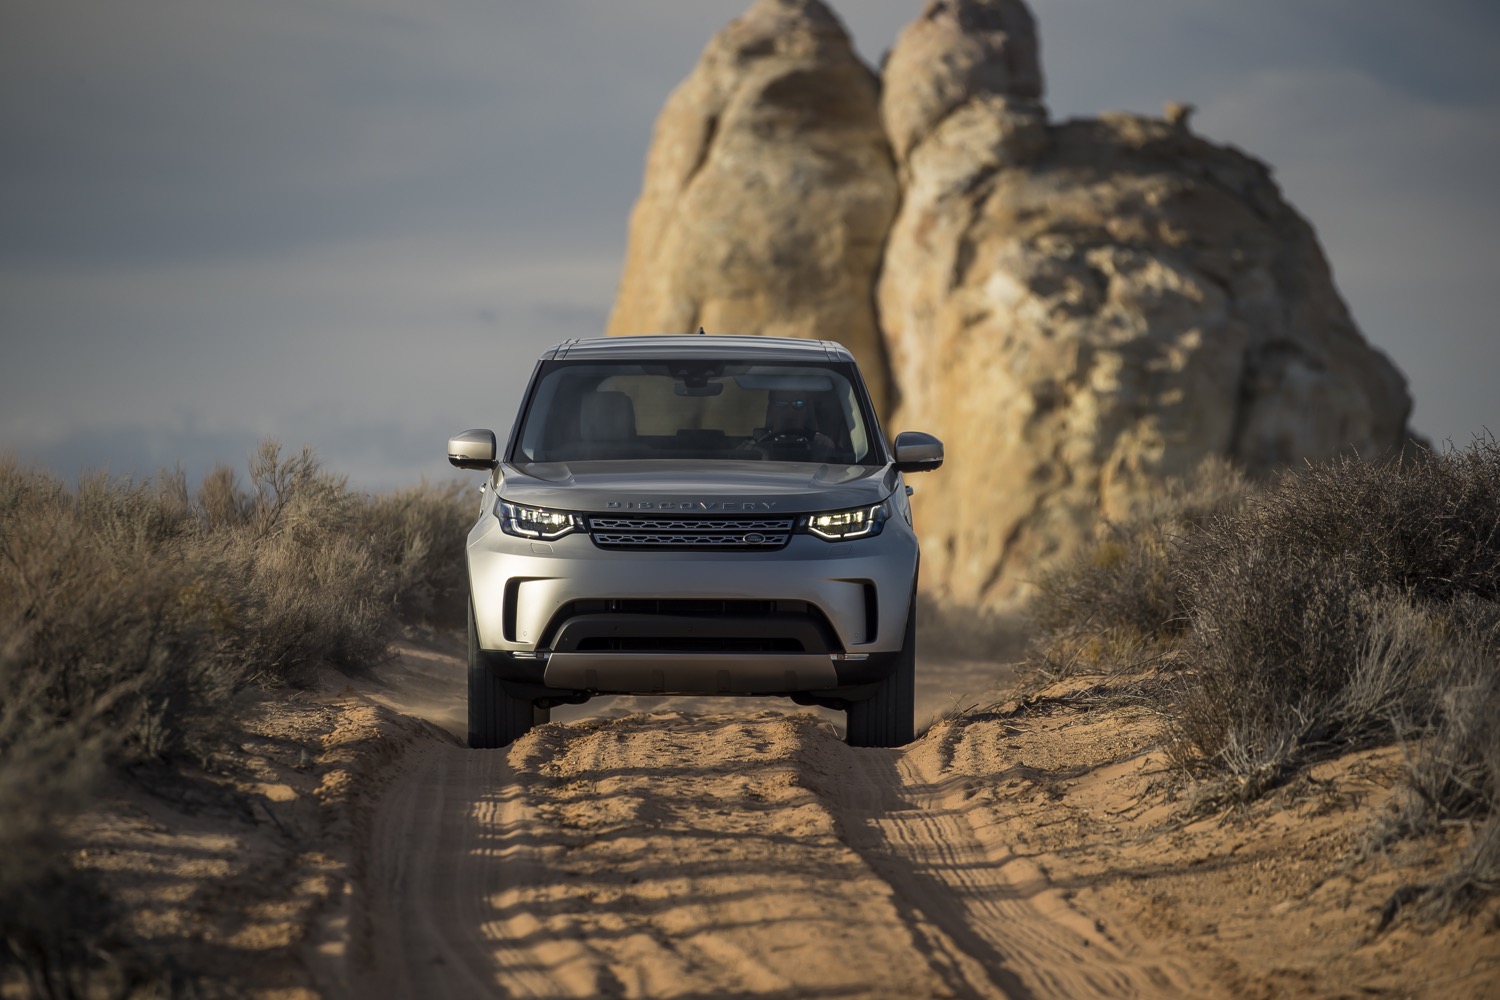 2018_land_rover_new_discovery_offroad_05